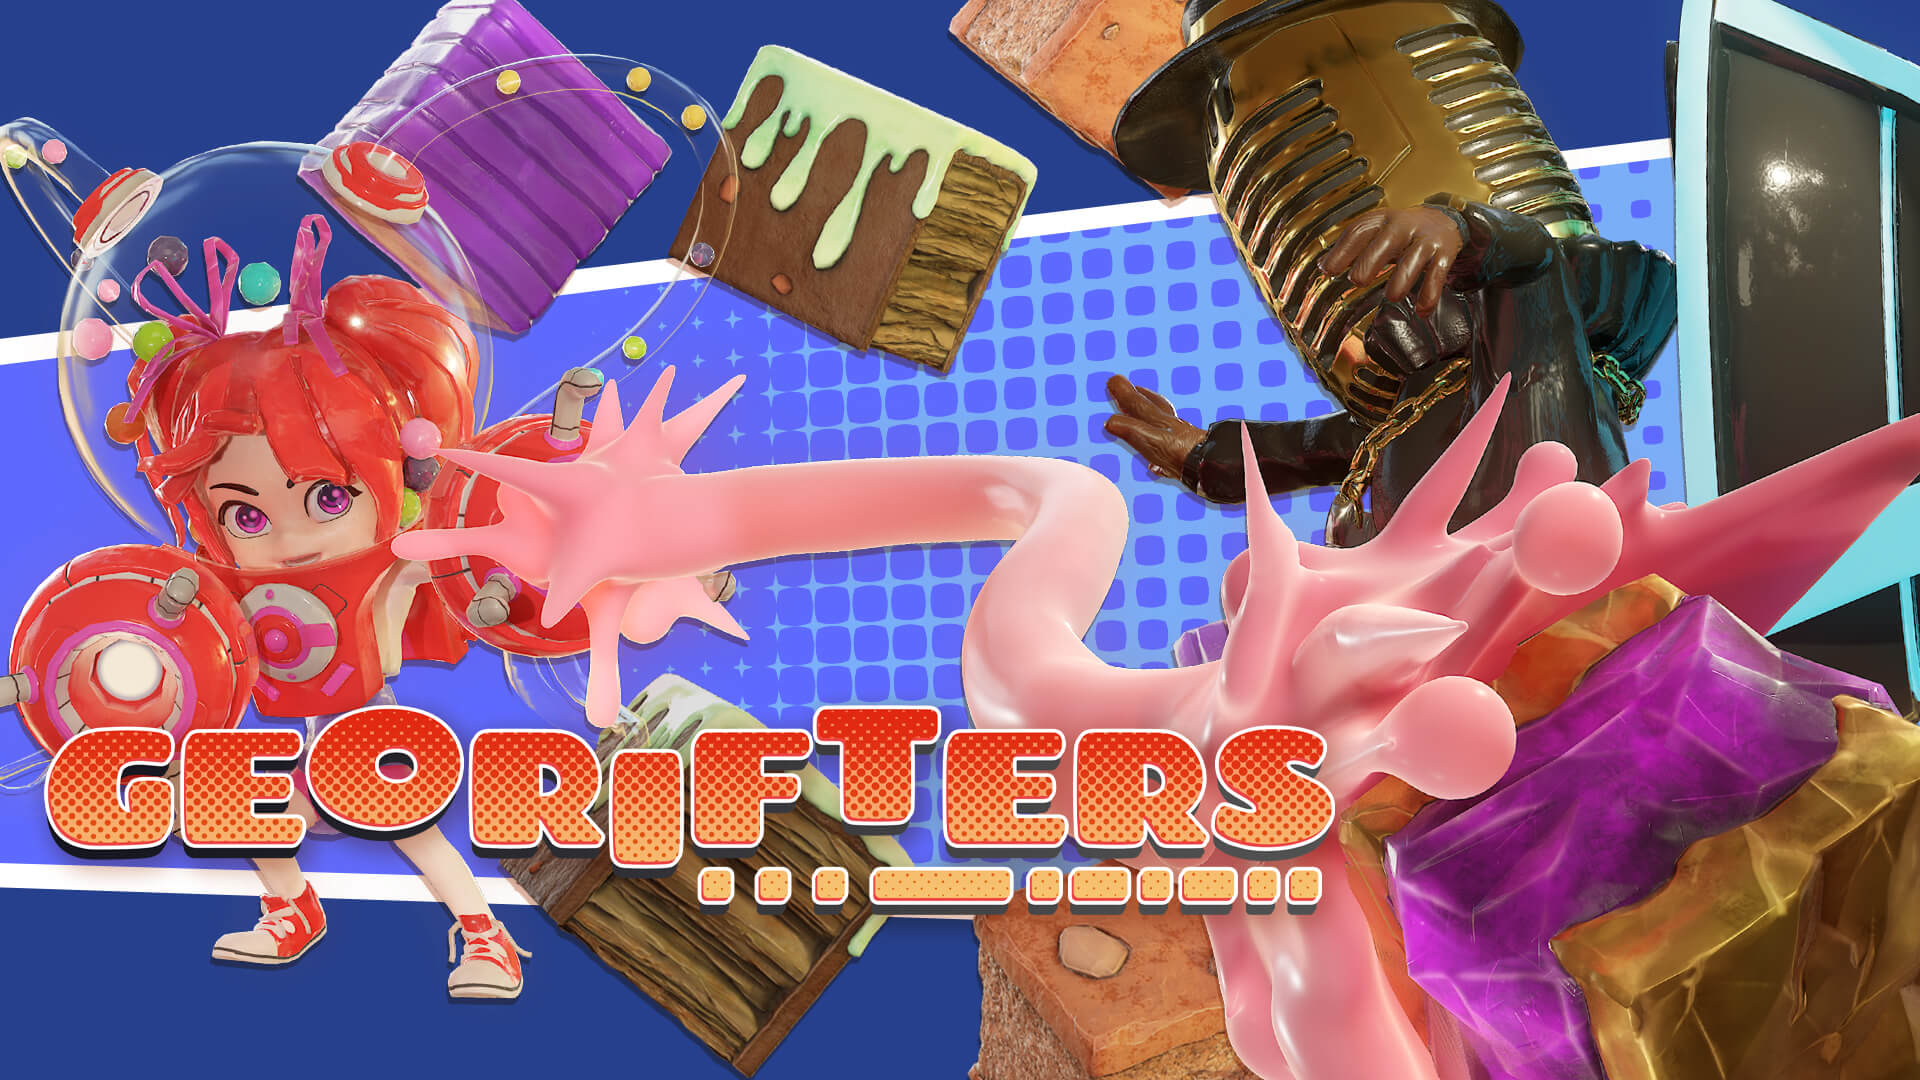 Georifters Free PC Download